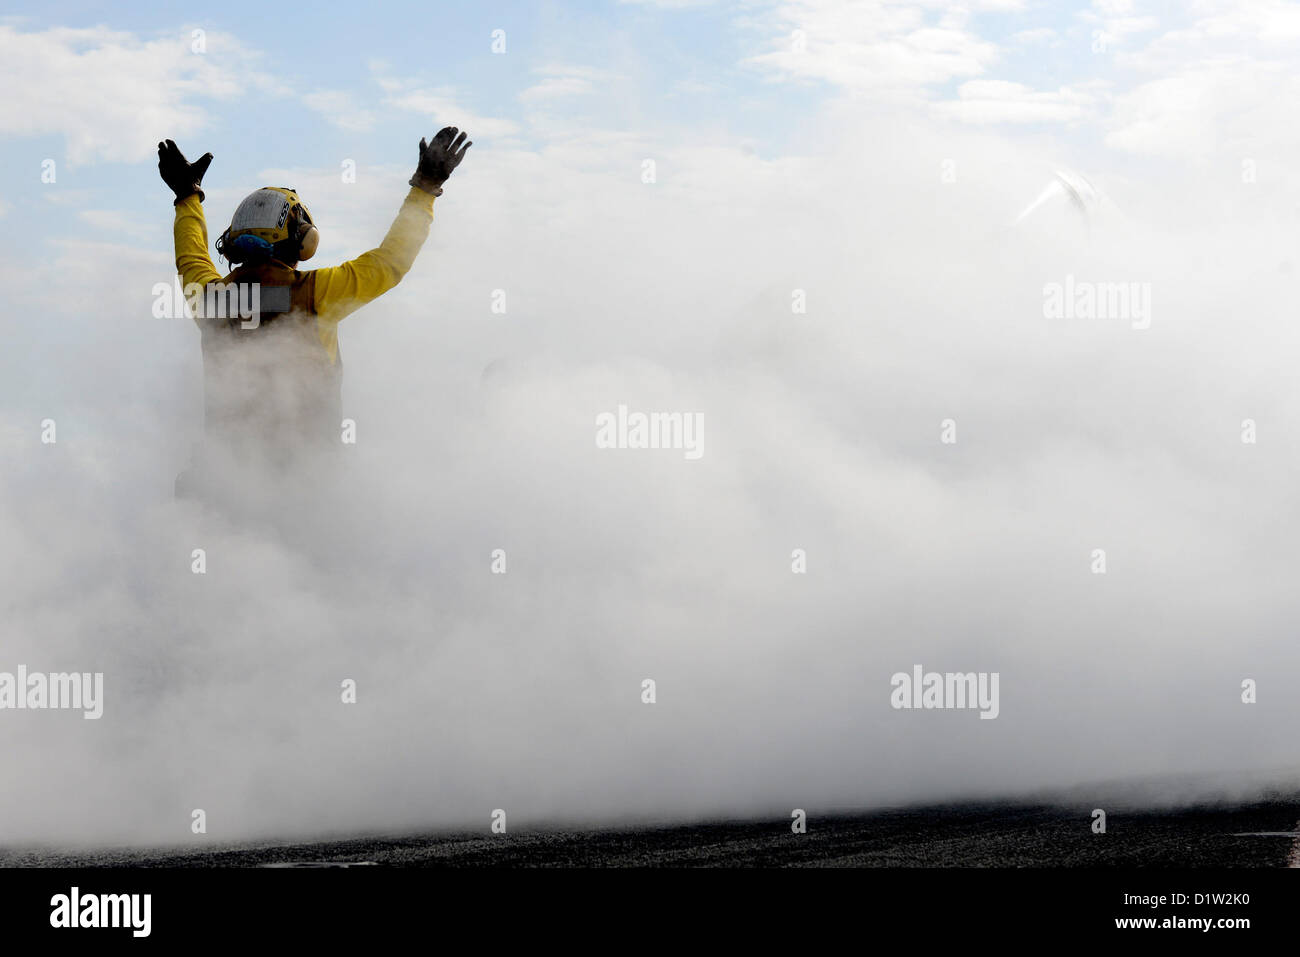 A 'shooter' (catapult/arresting gear officer) signals for the launch of an aircraft on the flight deck of the aircraft carrier USS John C. Stennis (CVN 74). John C. Stennis is deployed to the U.S. 5th Fleet area of responsibility conducting maritime security operations, theater security cooperation efforts and support missions for Operation Enduring Freedom. JAN 6, 2013 (U.S. Navy photo) Stock Photo